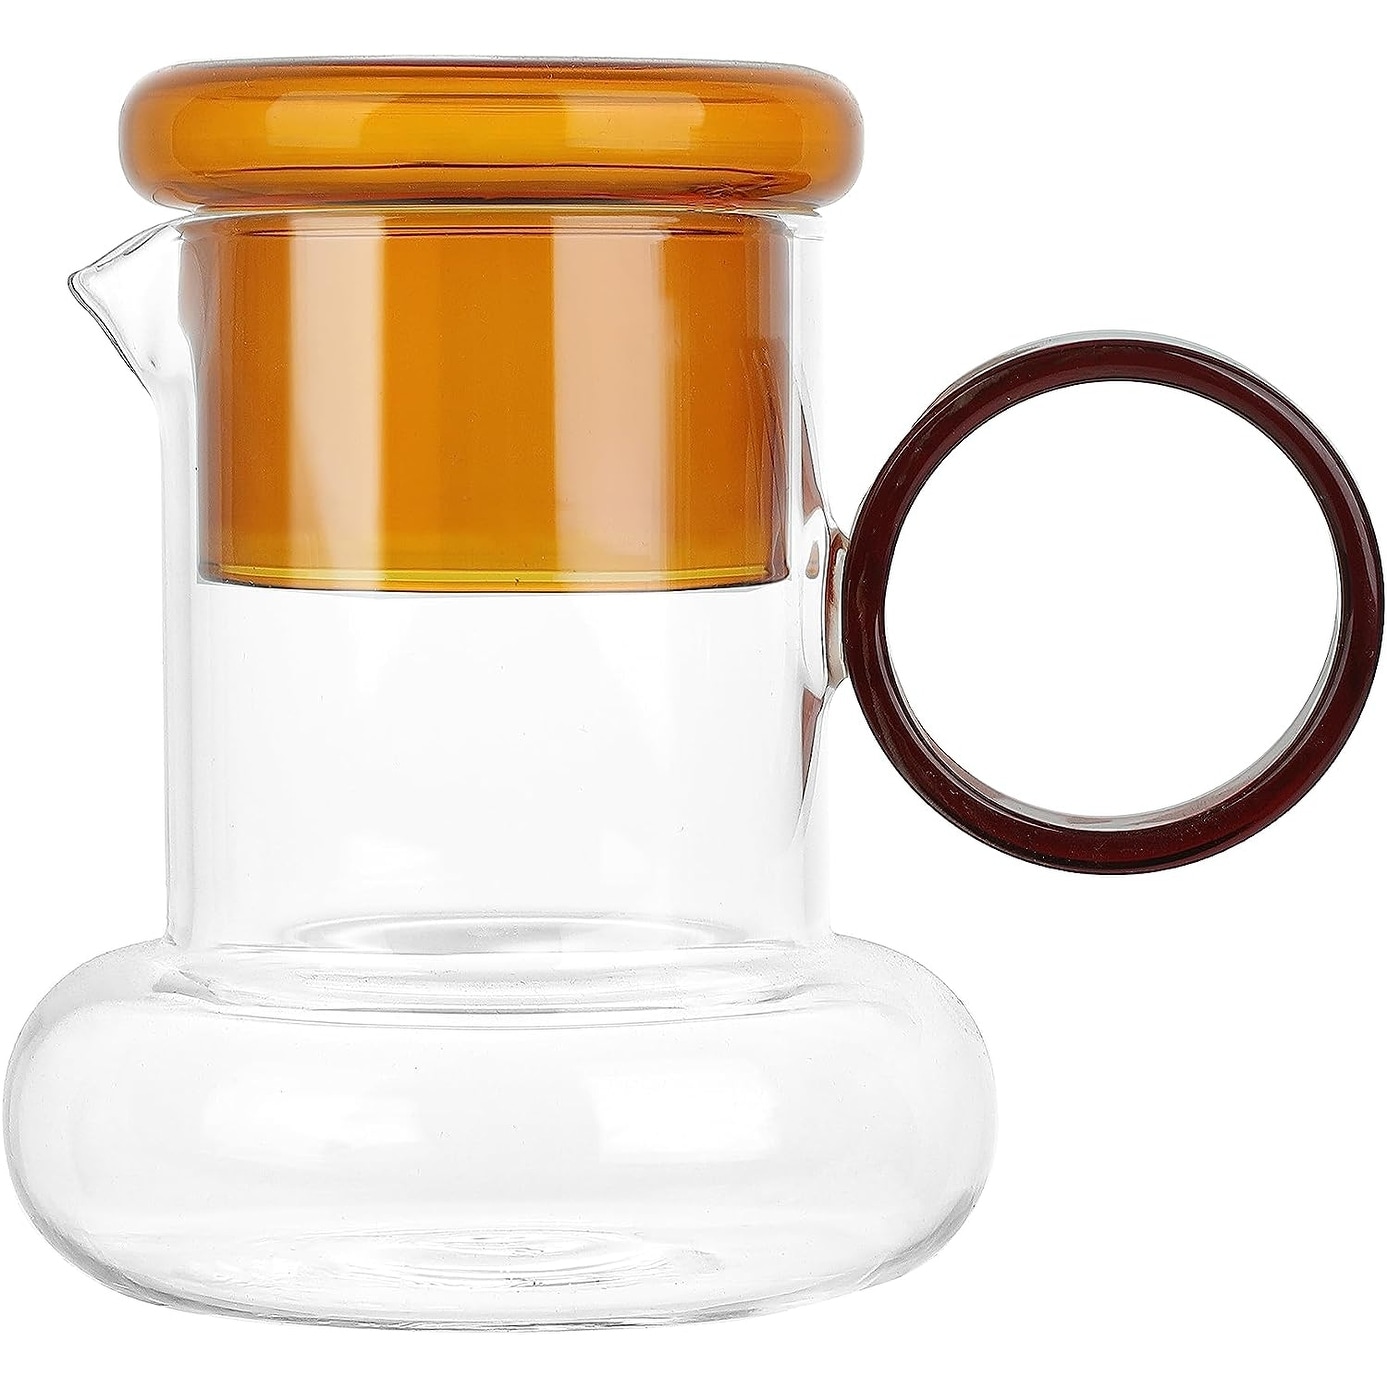 https://ak1.ostkcdn.com/images/products/is/images/direct/43ab76720778674b2adc39578dc744db75f85d37/Elle-Decor-Ring-Pitcher-Set-Carafe-and-Water-Drinking-Glass-Lid.jpg